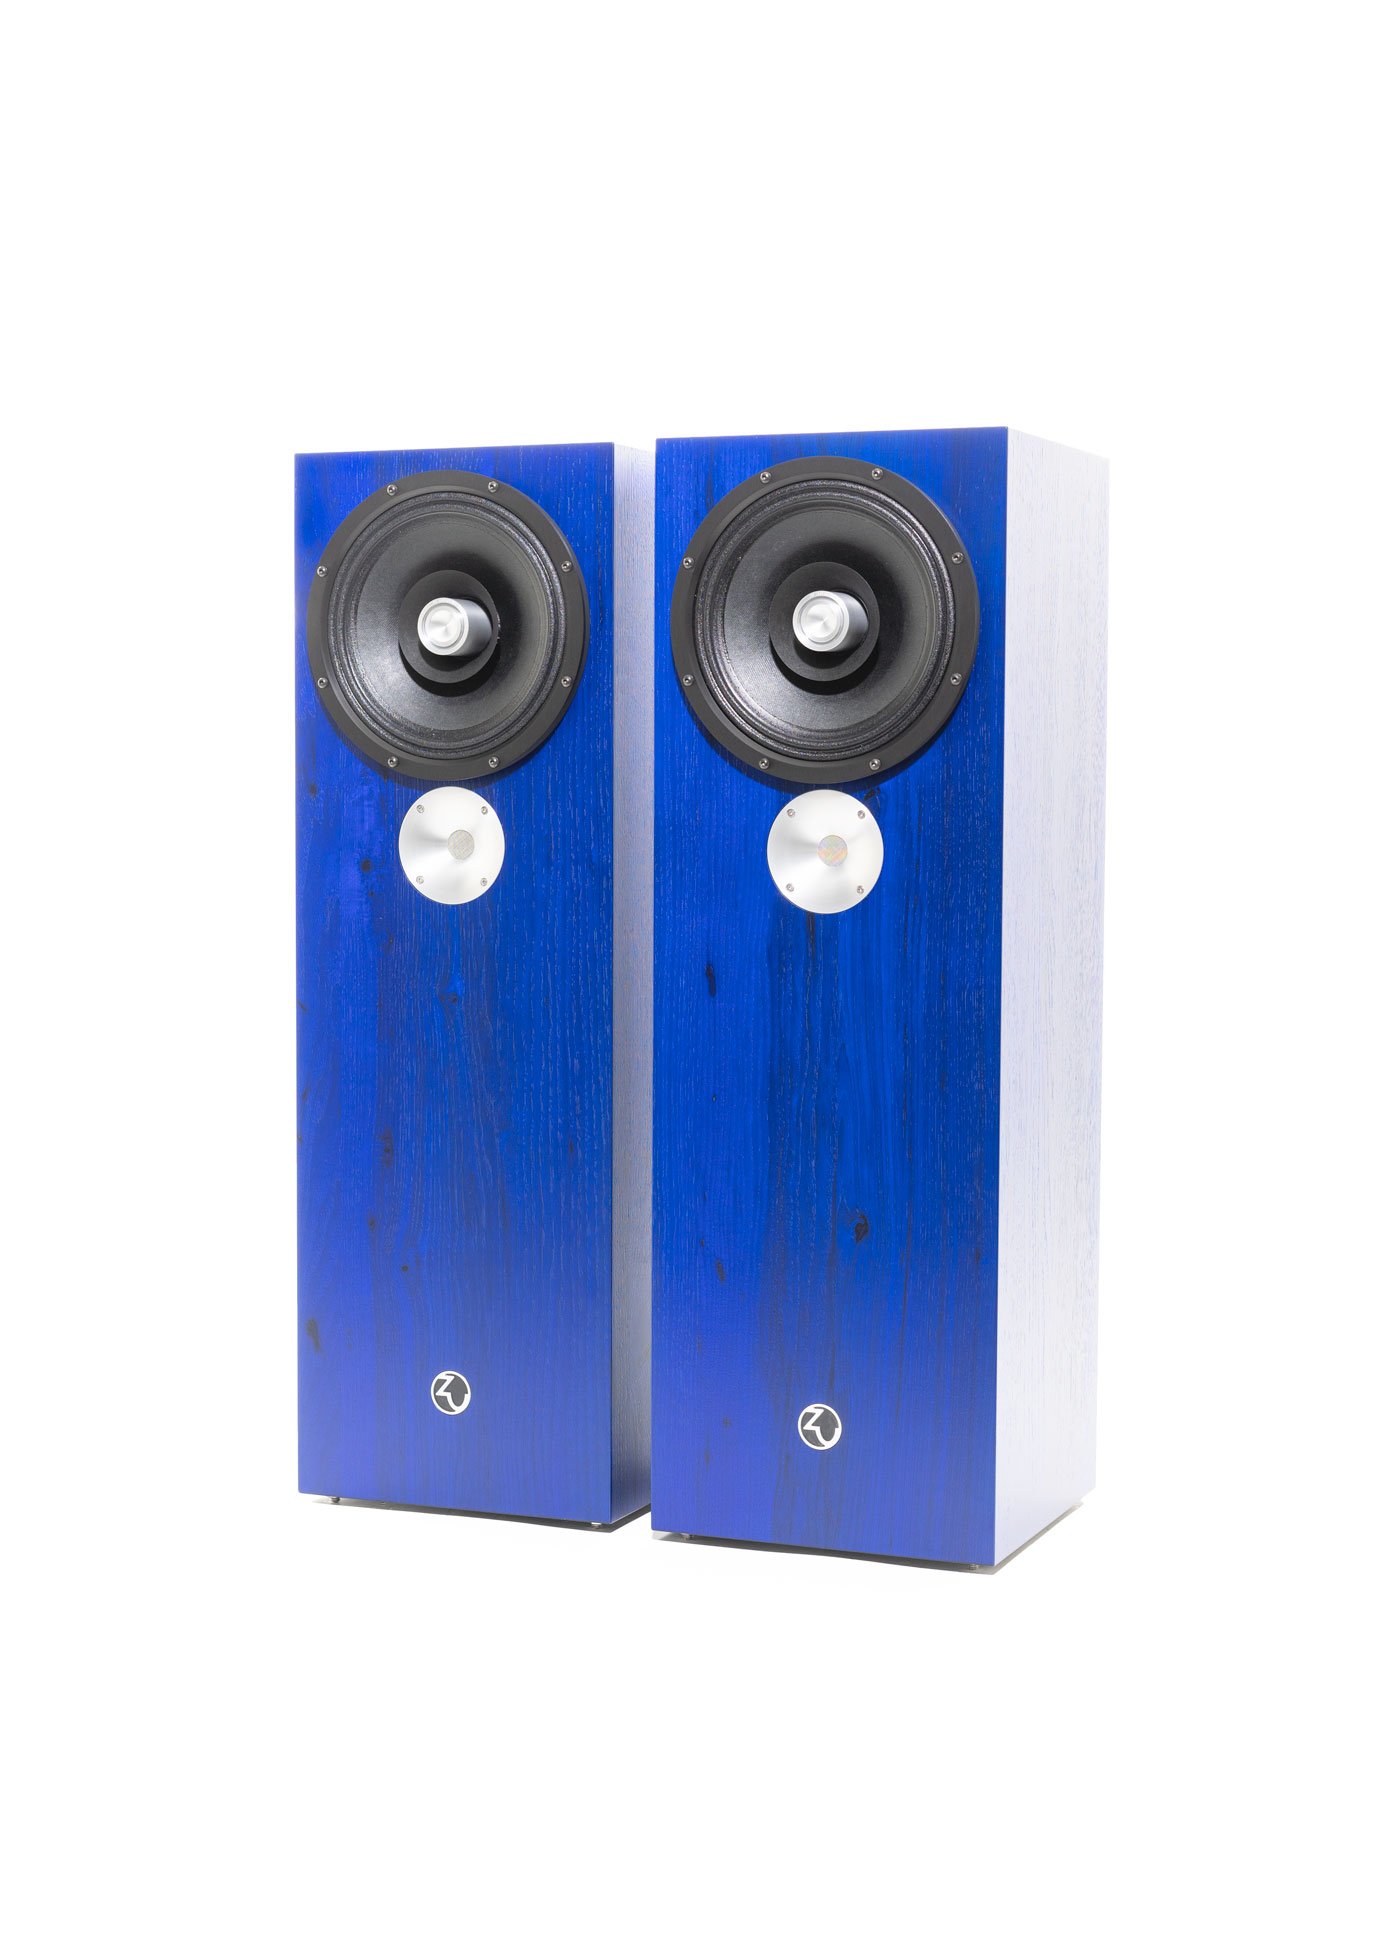 Vormen methodologie Lounge DW 6 | Zu Audio | Hi-Fi audio speakers and cables hand built in the USA